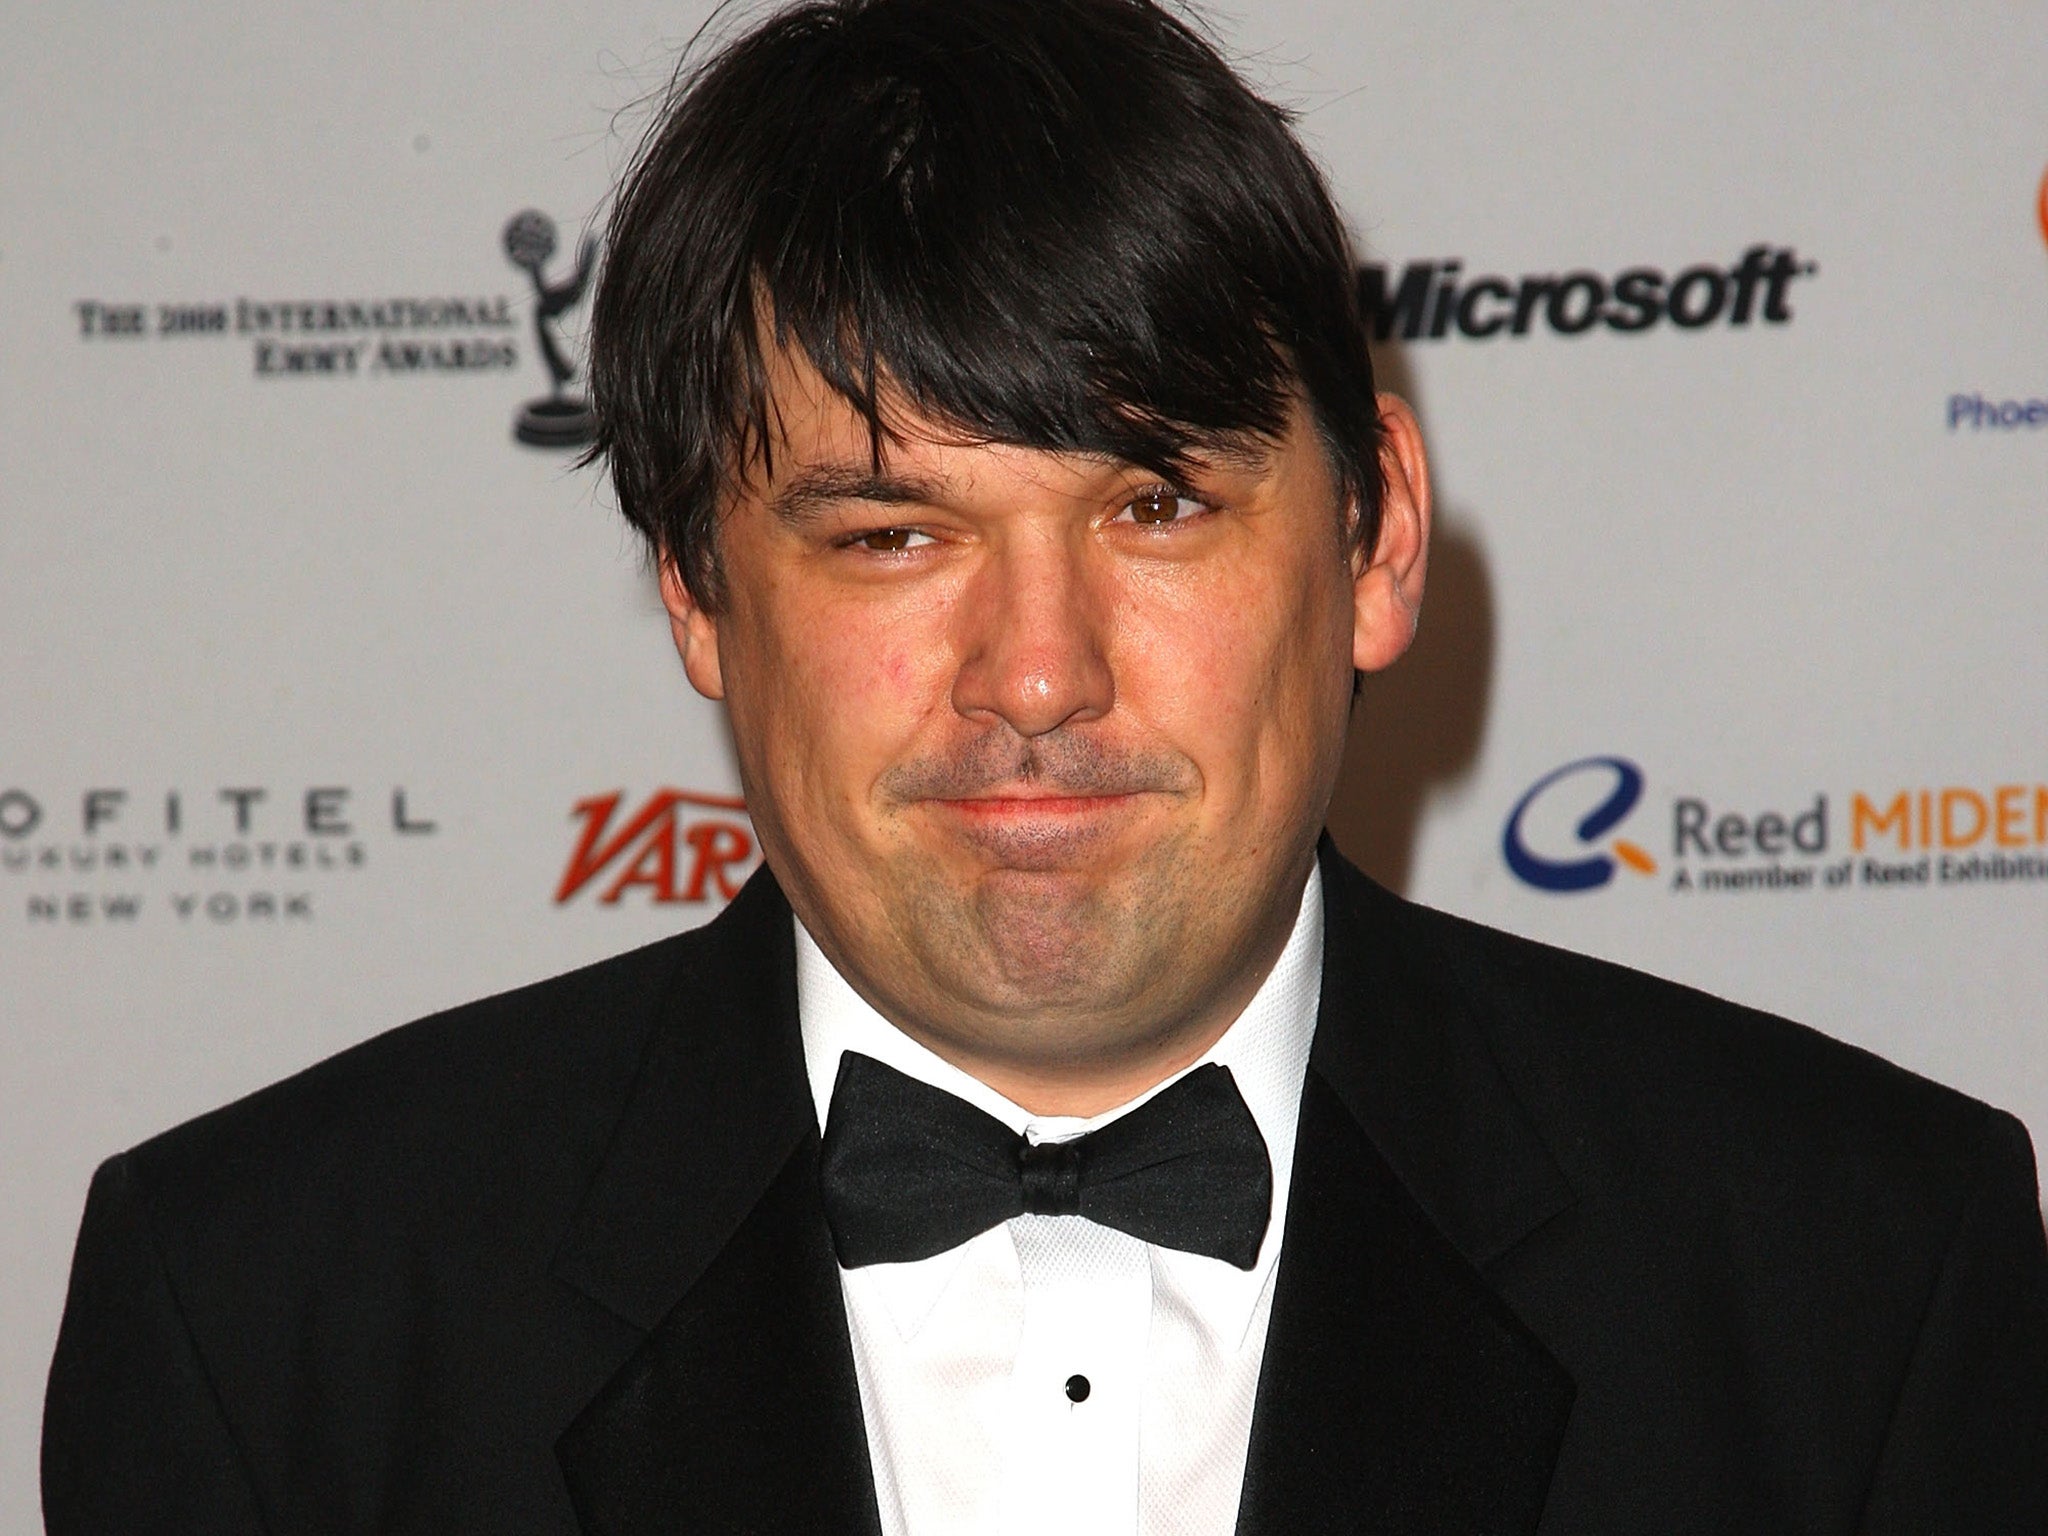 Graham Linehan says police asked him to stop contacting someone he had ‘no intention of contacting’